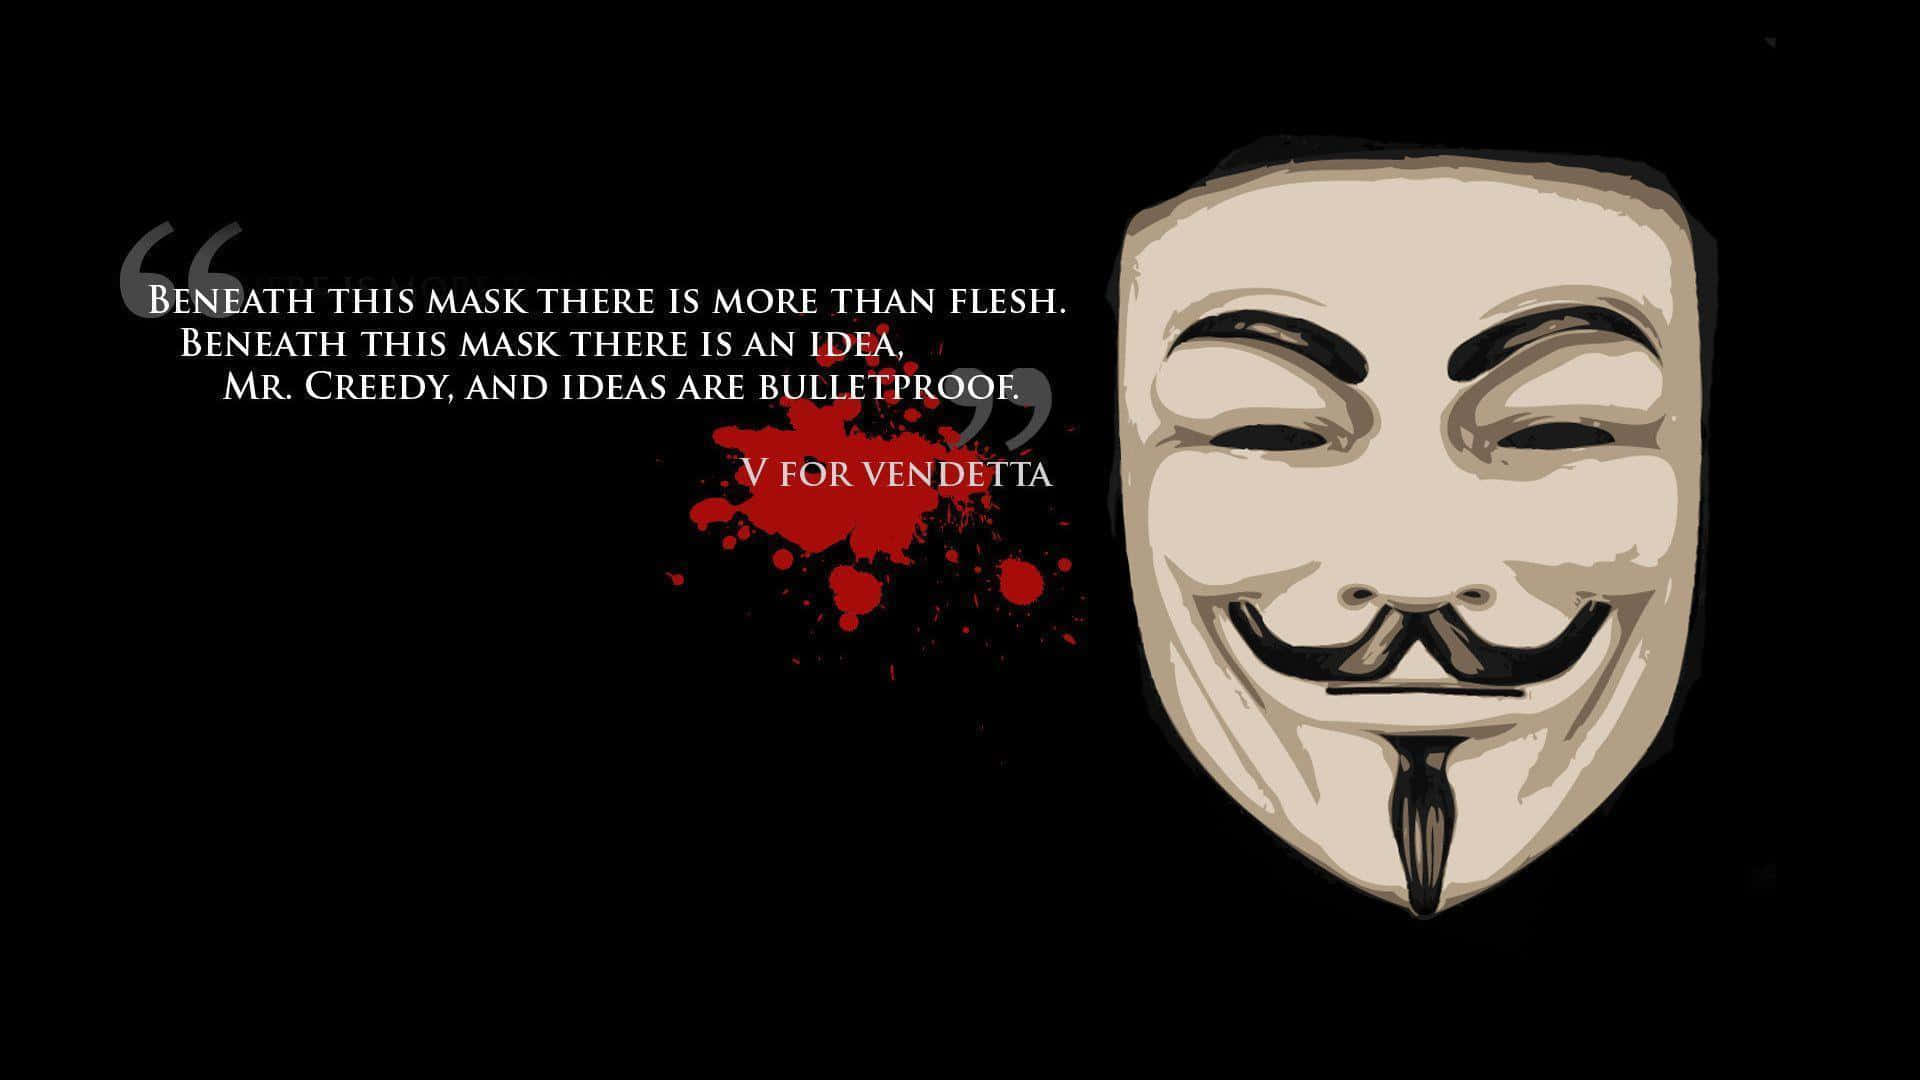 "Stay anonymous and break the system"